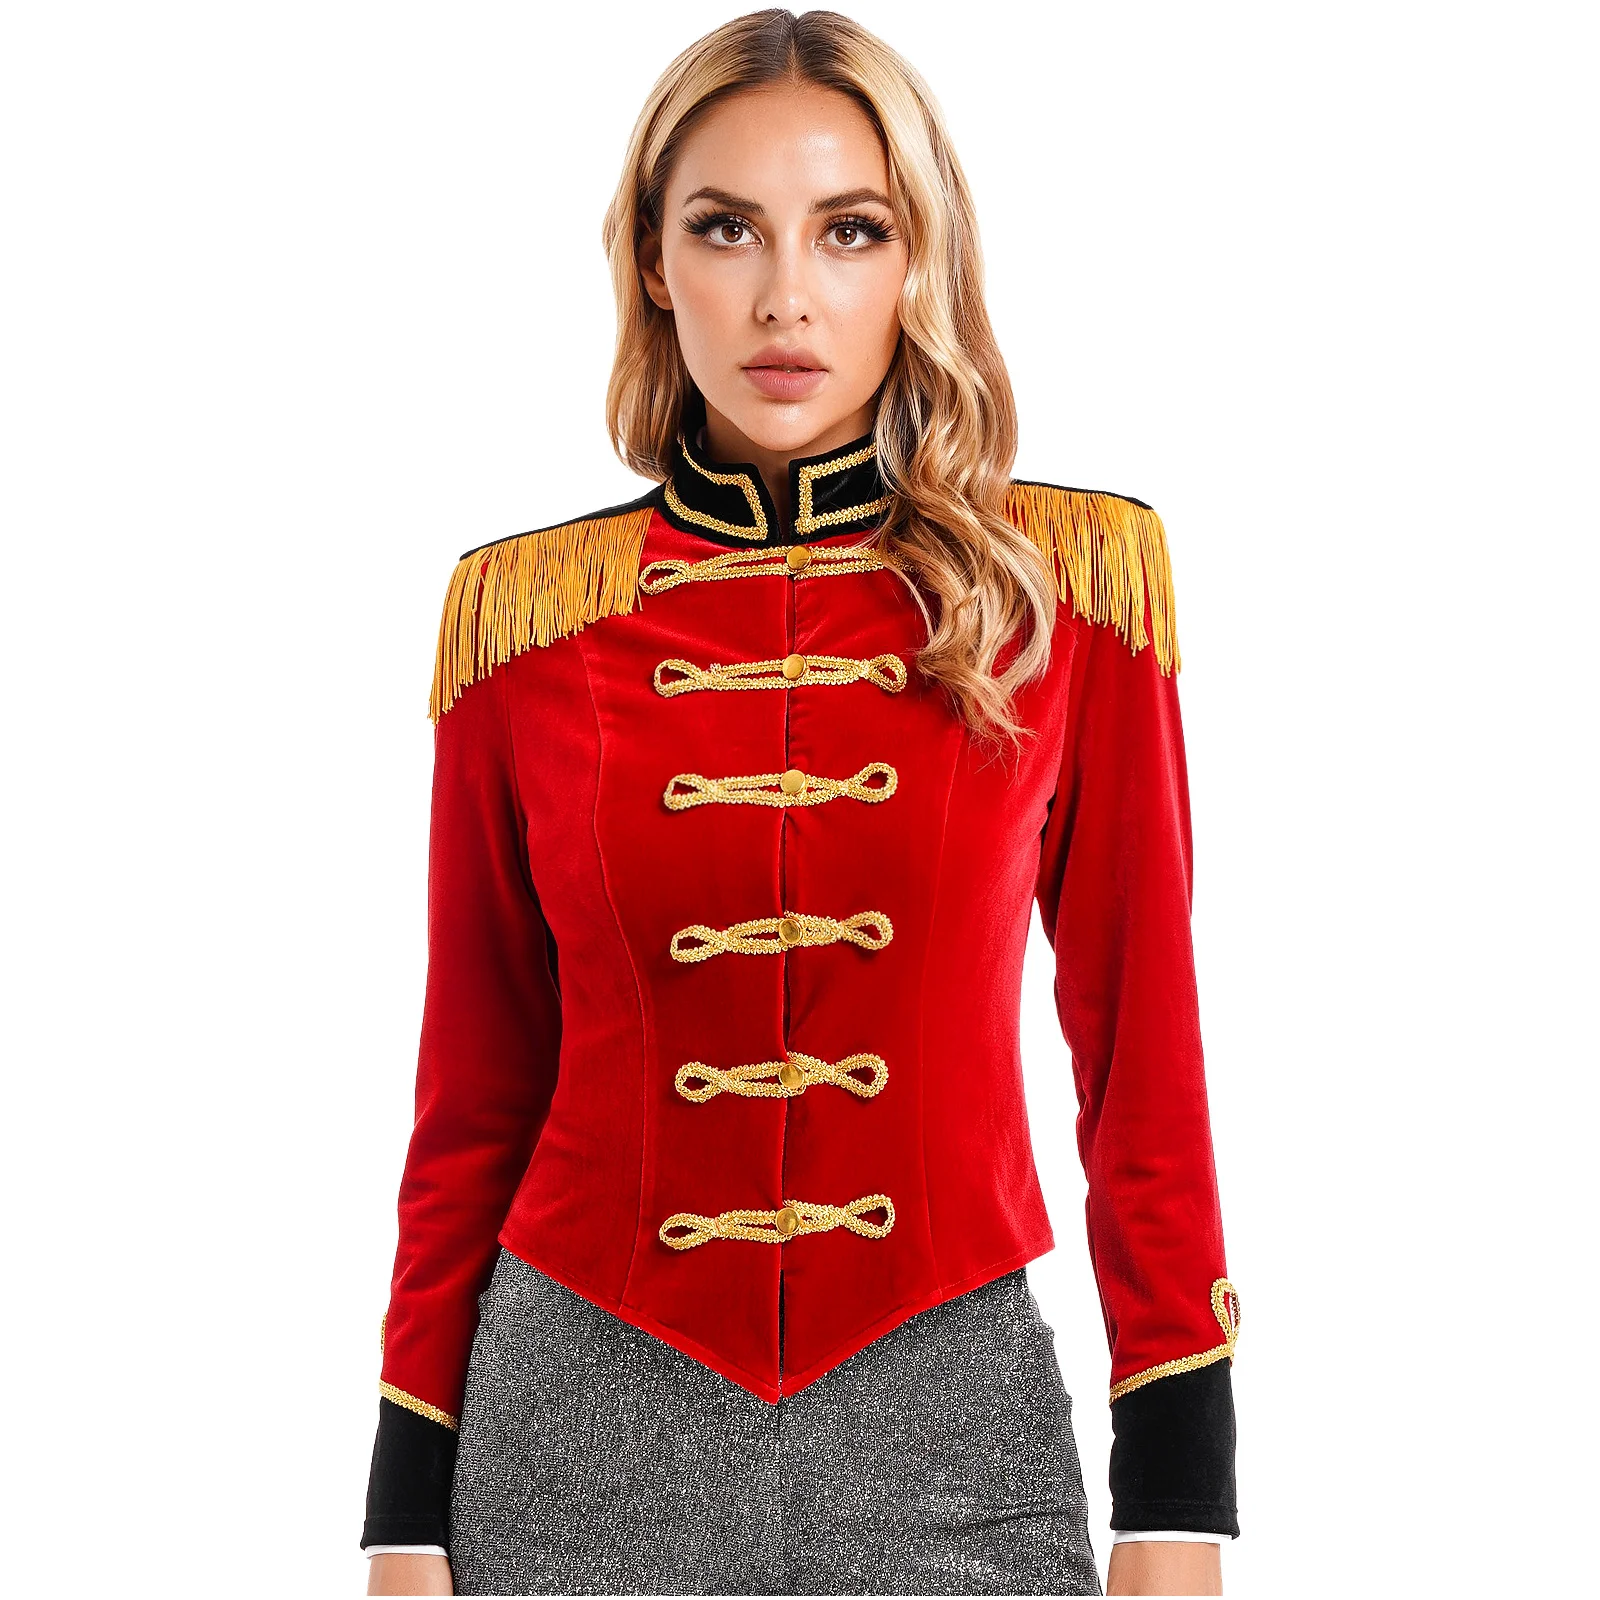 Womens Circus Ringmaster Costume Stand Collar Fringed Shoulder Board Velvet Jacket Coat Halloween Carnival Party Cosplay Costume squid game cosplay costume mens jacket jung hoyeon same sportswear 456 218 067 printing jacket pants halloween cosplay set d9